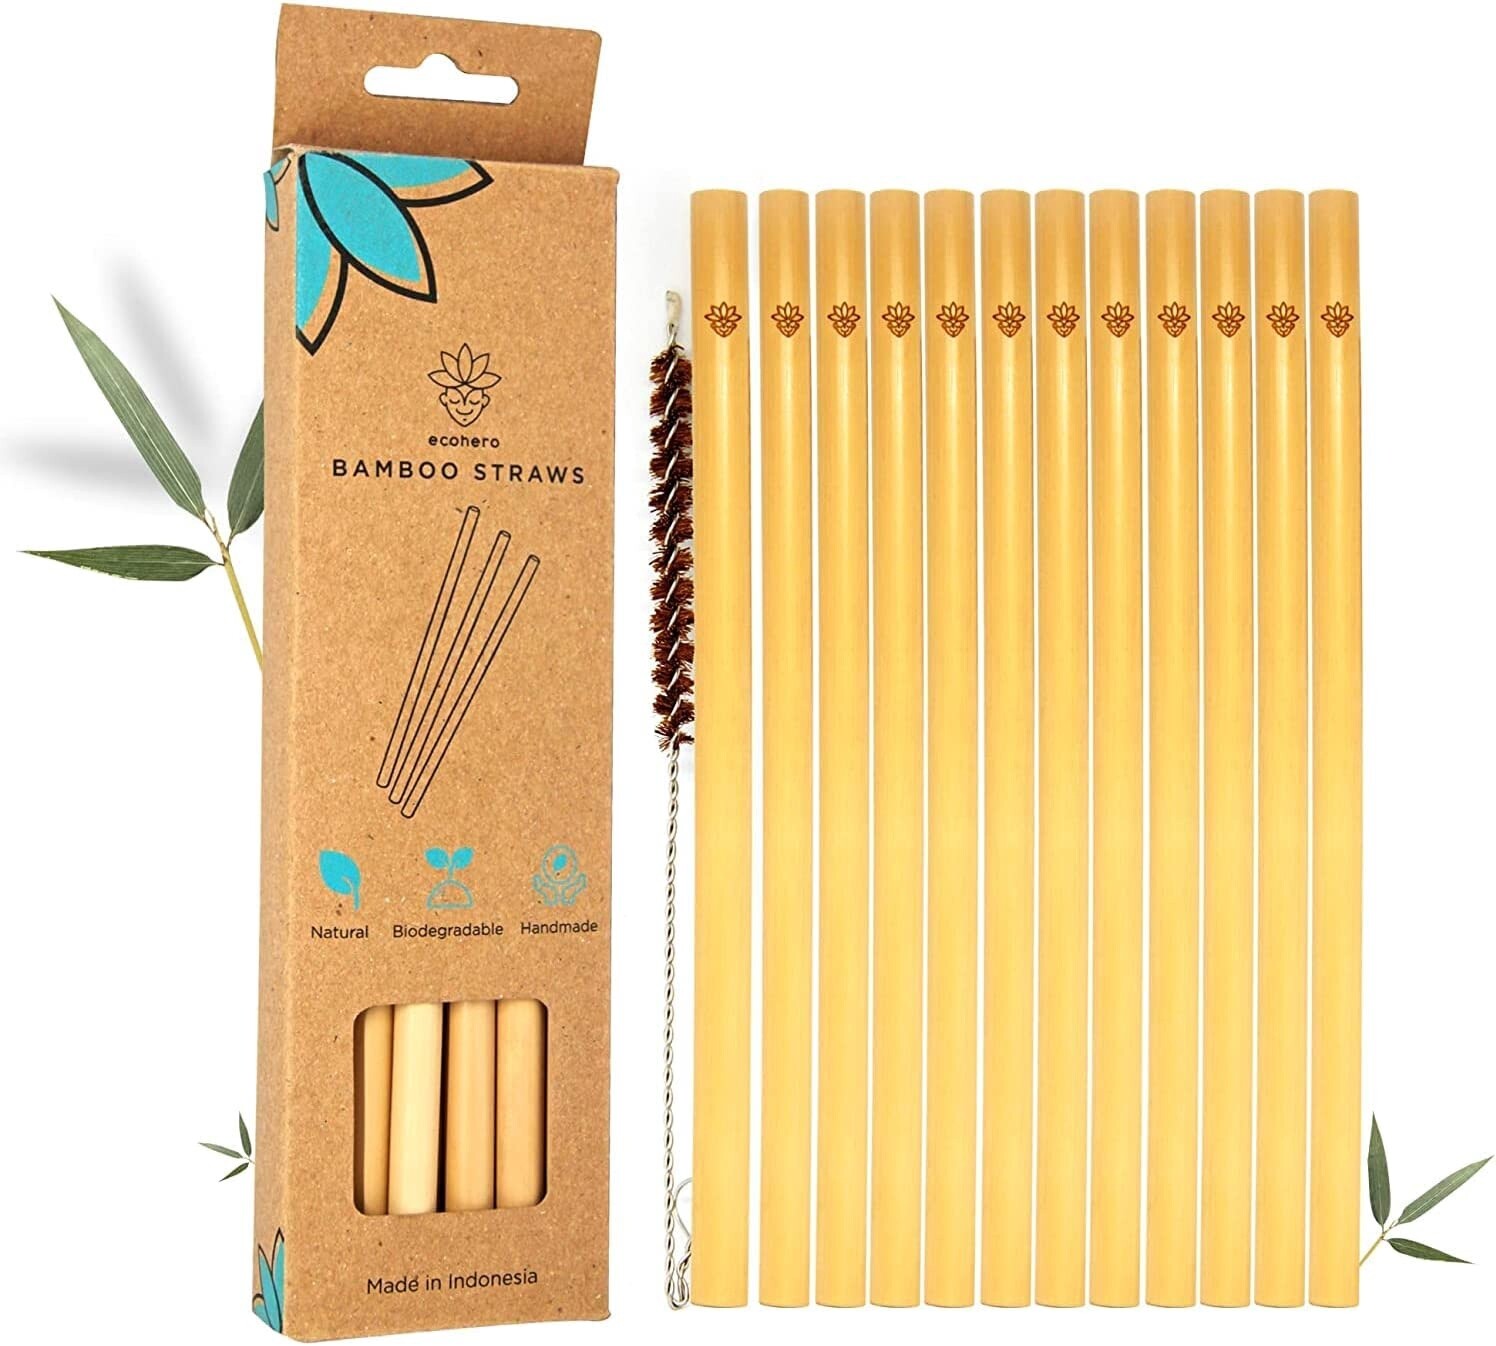 Bamboo Straws - package of 12